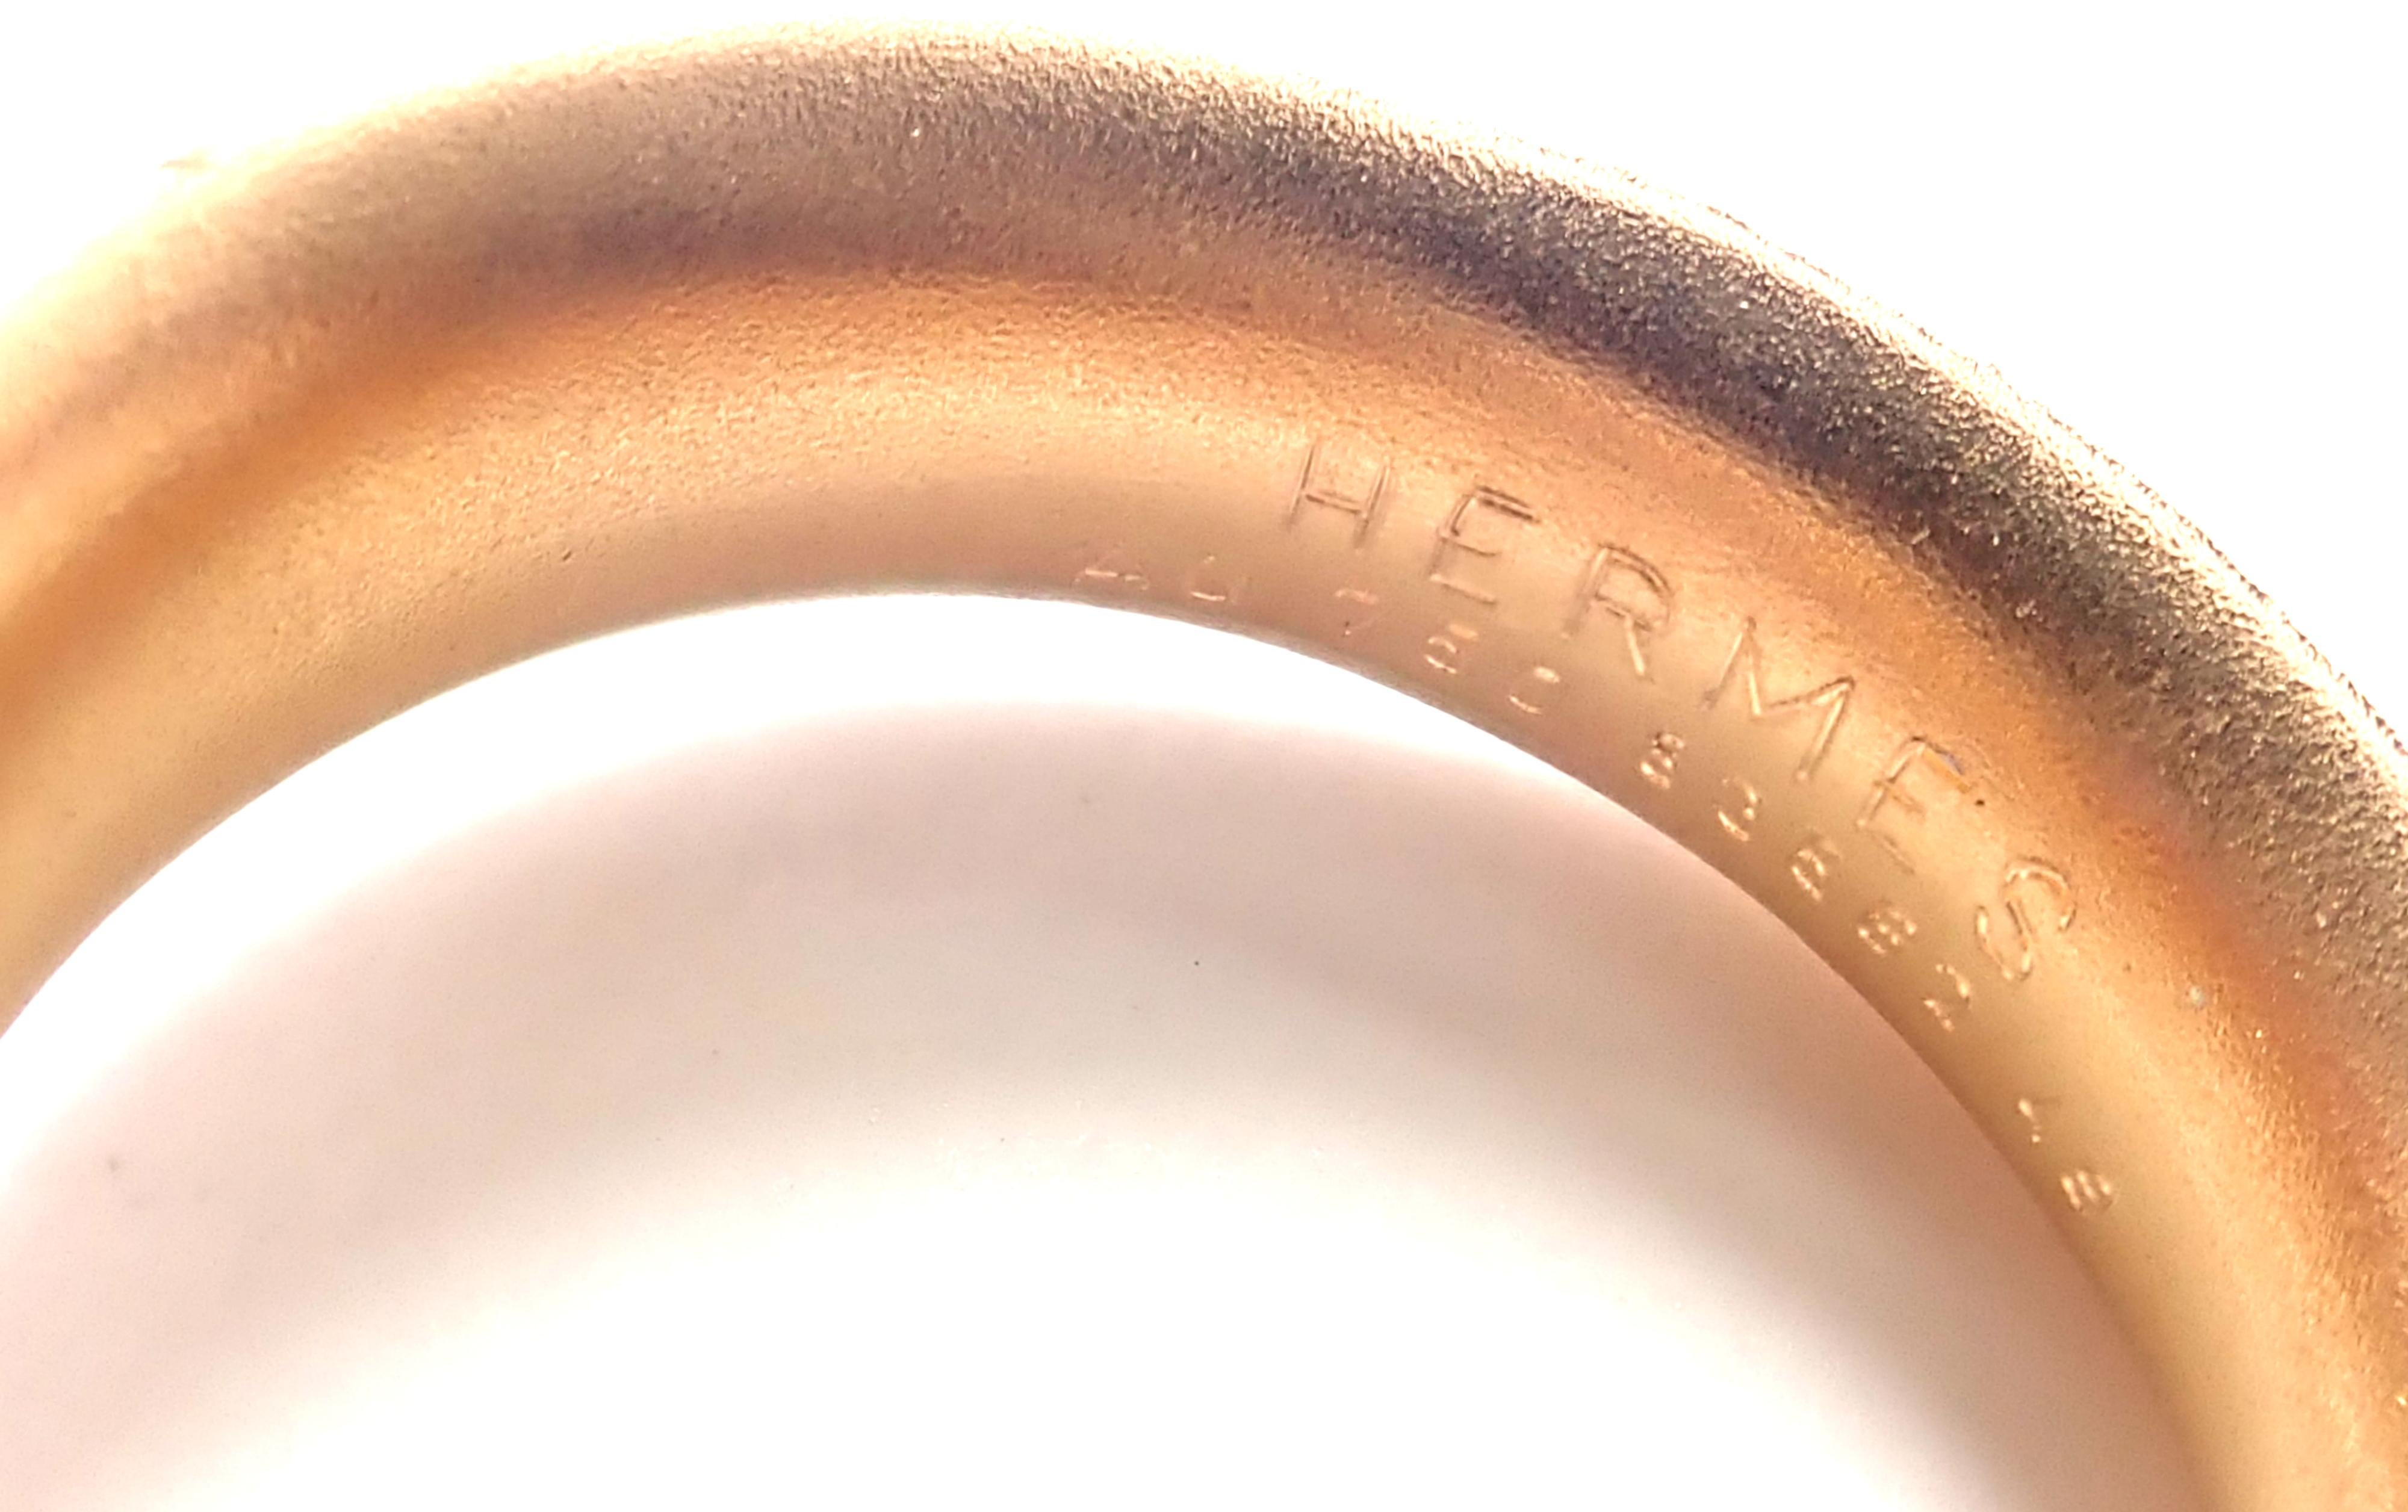 18k Rose Gold Olive Wood Band Ring by Hermes. 
Details: 
Size: European 49 US 4.75 
Weight: 7.7 grams
Width: 9mm
Stamped Hallmarks: Hermes 750 49 83562
*Free Shipping within the United States*
YOUR PRICE: $2,000
T2421ahe